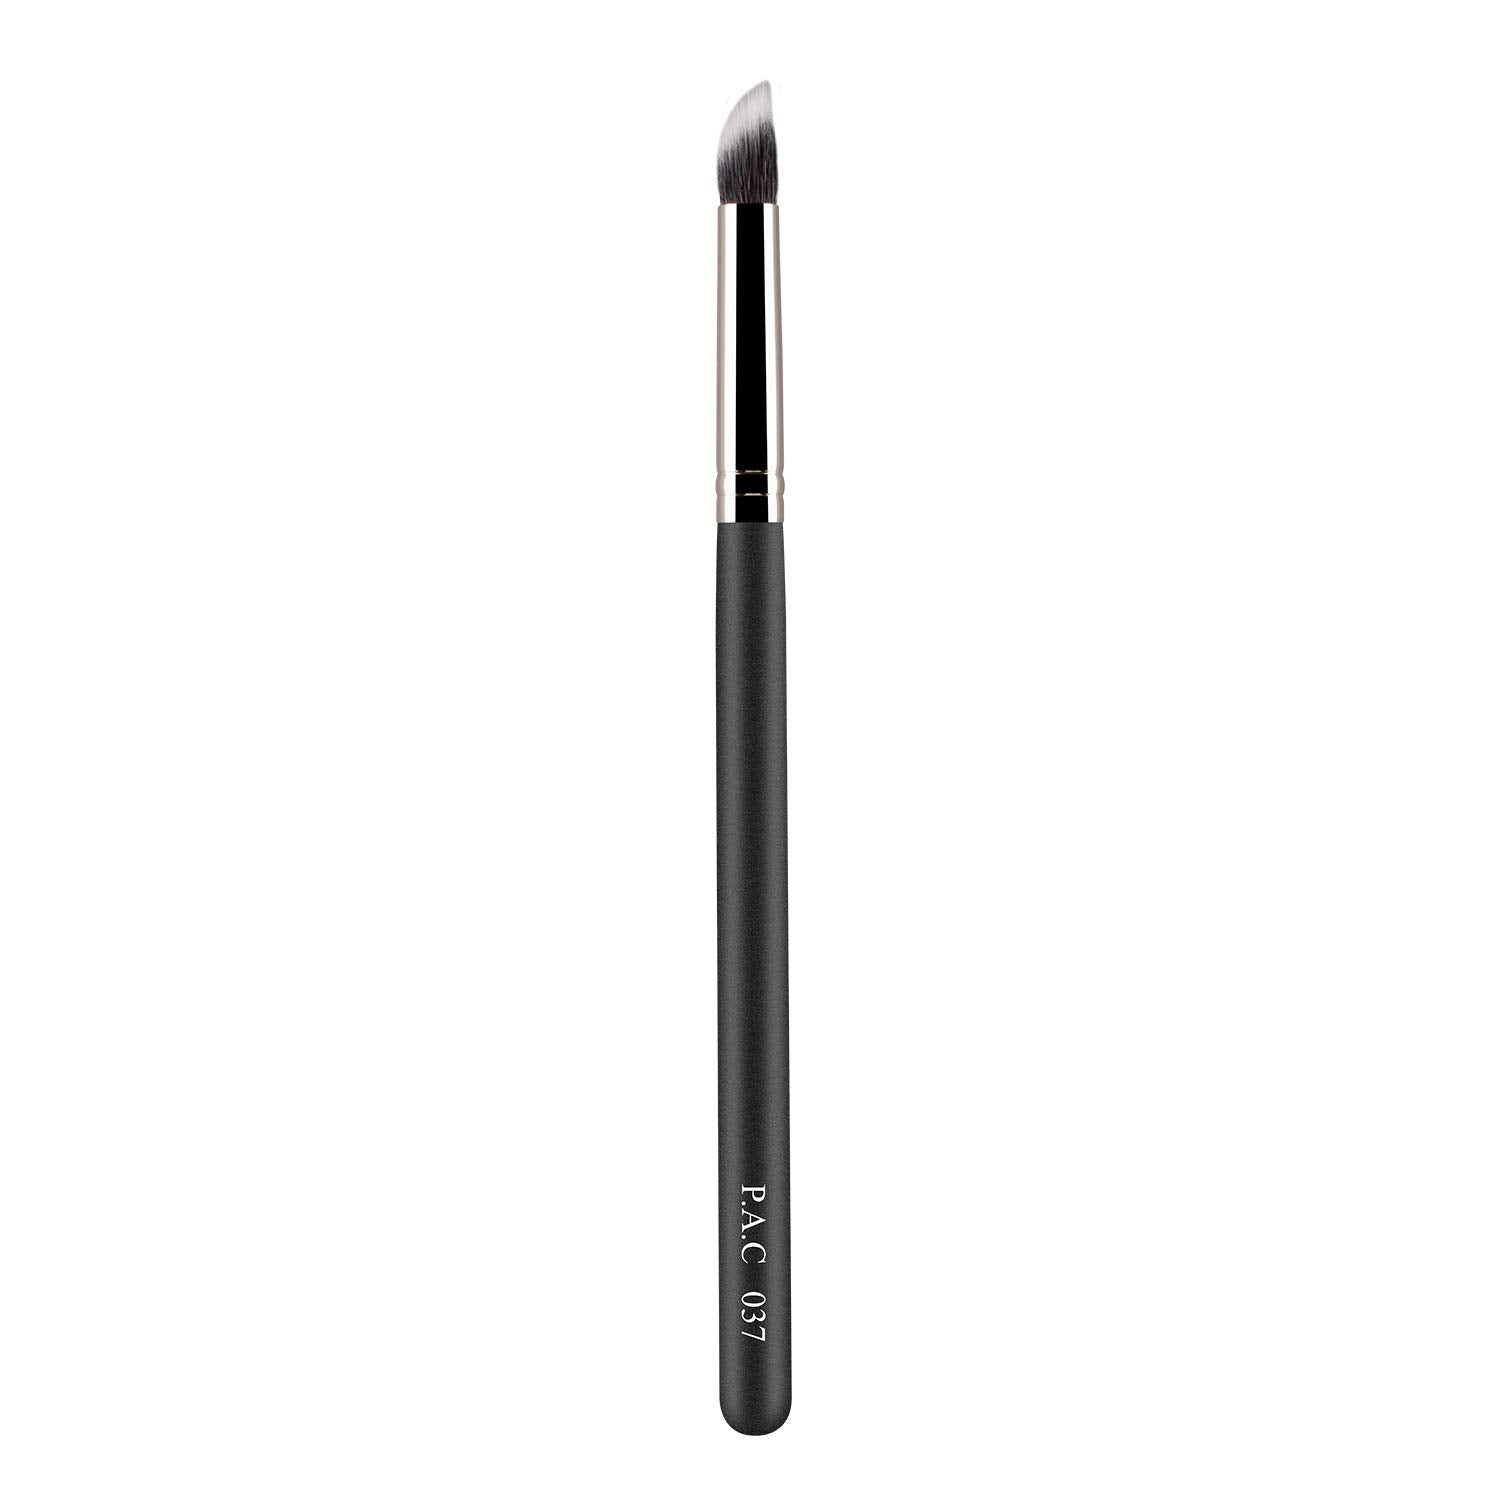 PAC Concealer Brush 037 PAC